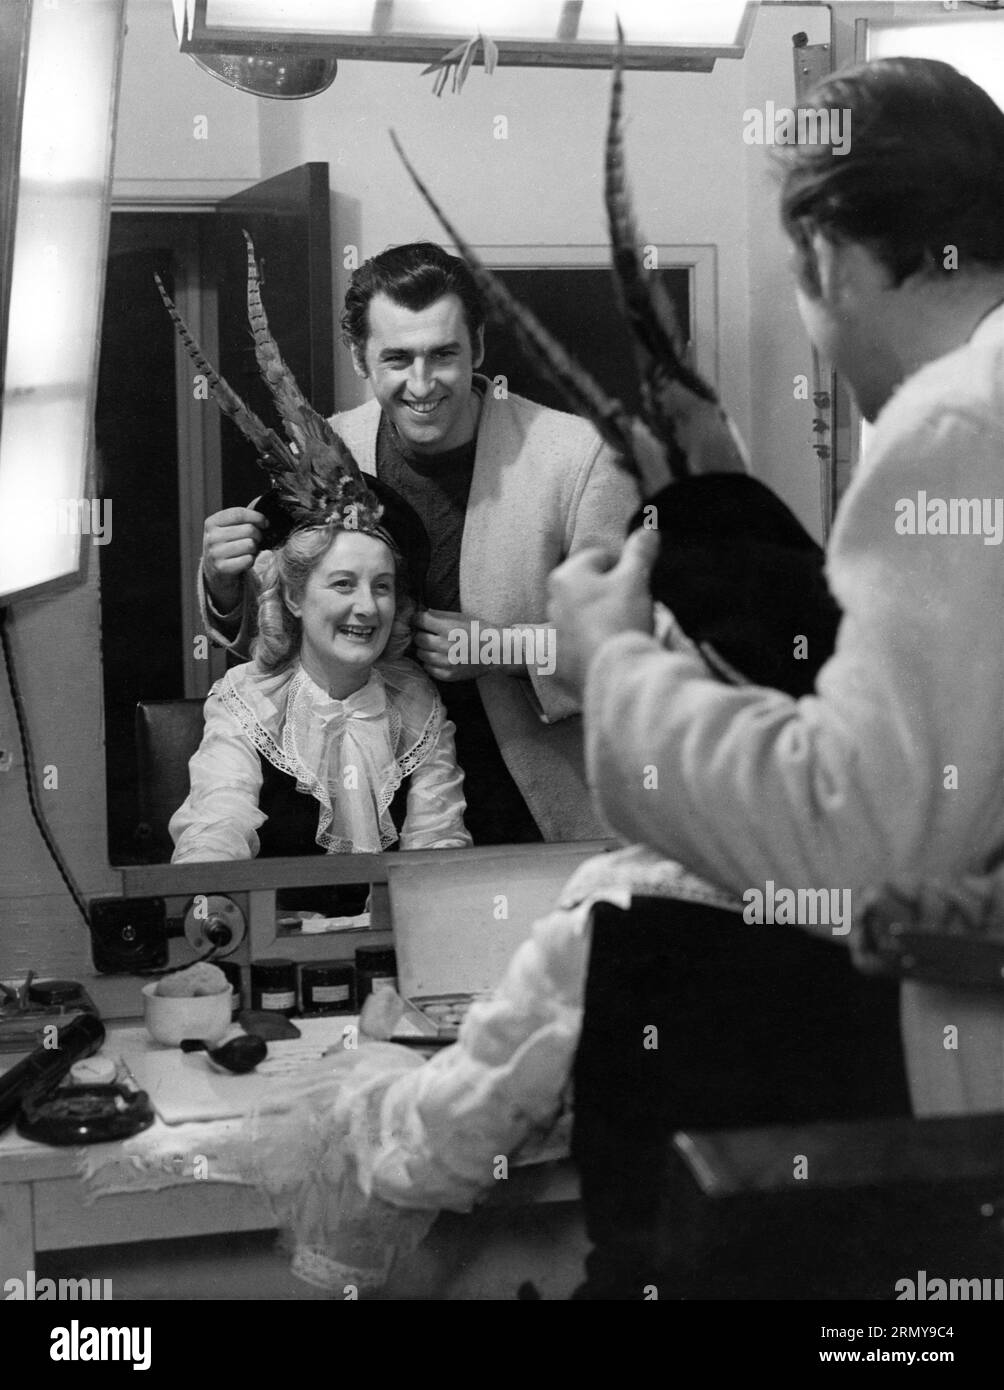 STEWART GRANGER in costume for his latest film CAPTAIN BOYCOTT 1947 dressing room candid with WILKIE, leading lady in CINDERELLA pantomime likely held at film studio publicity for Individual Pictures Stock Photo